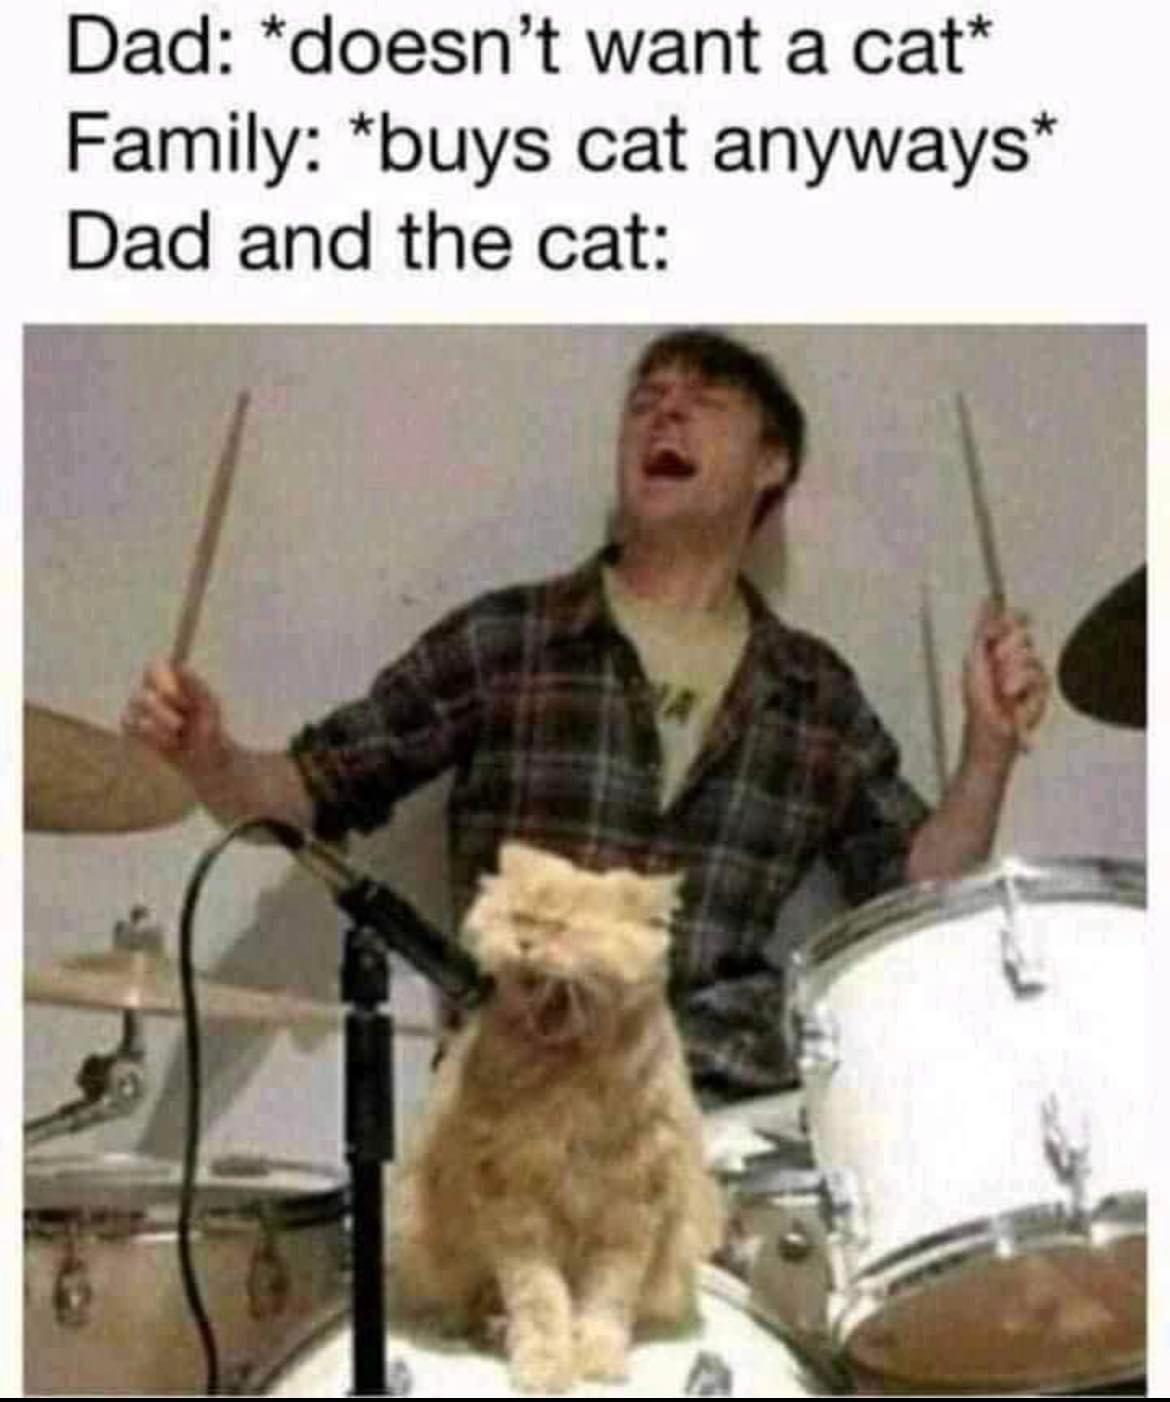 dank memes - dad and the cat meme drum - Dad doesn't want a cat Family buys cat anyways Dad and the cat